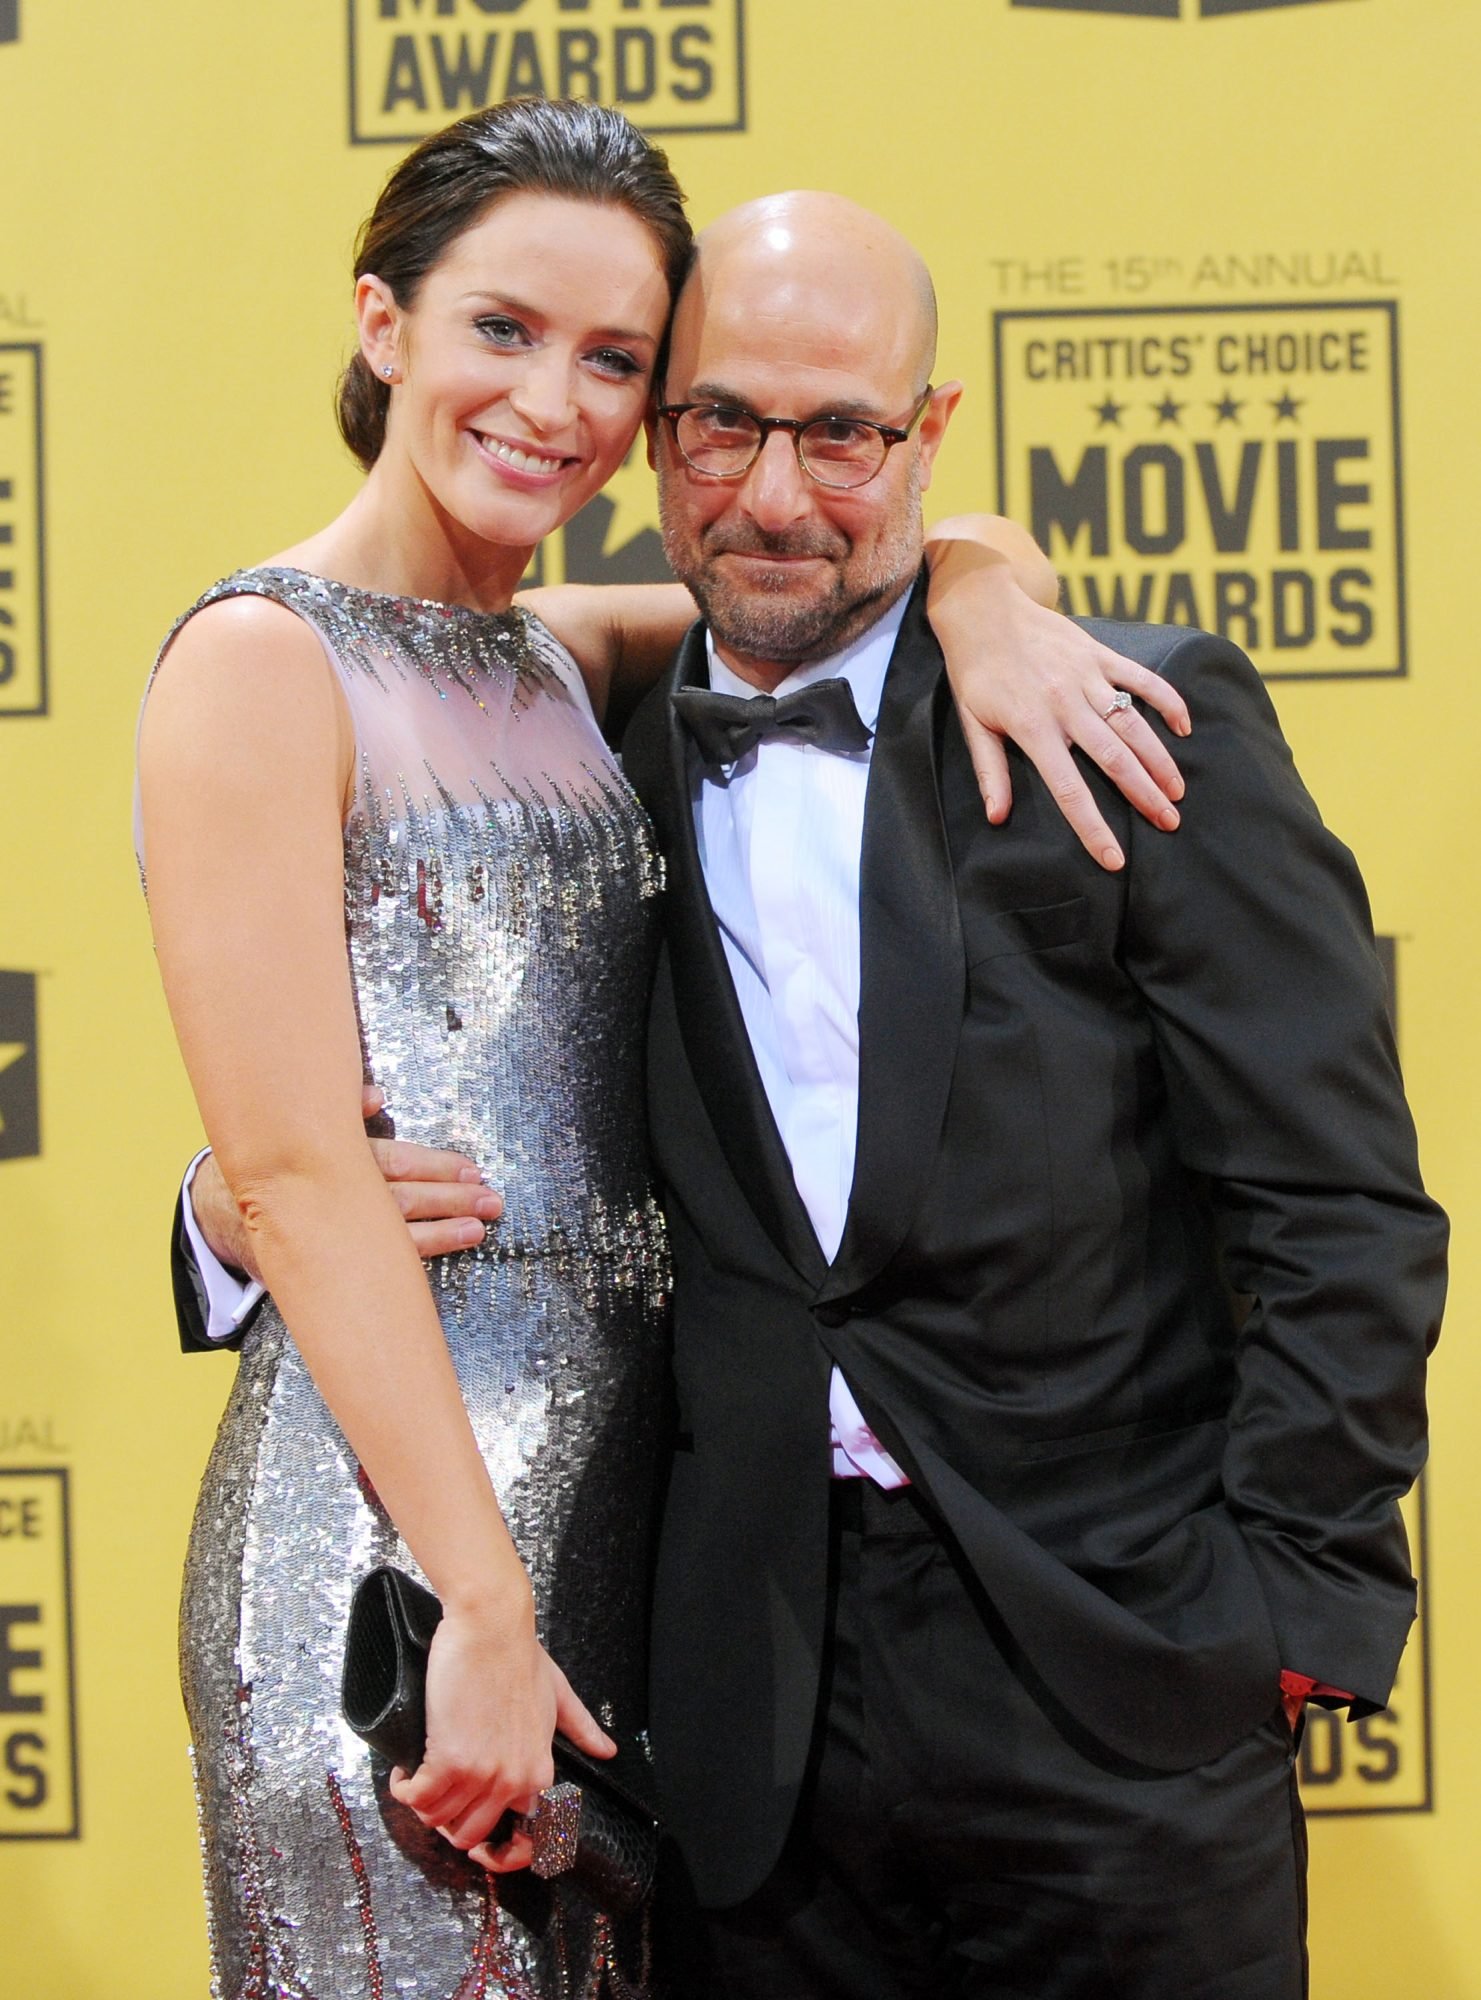 Tucci struck up a close friendship with Emily after the pair starred together in "The Devil Wears Prada."